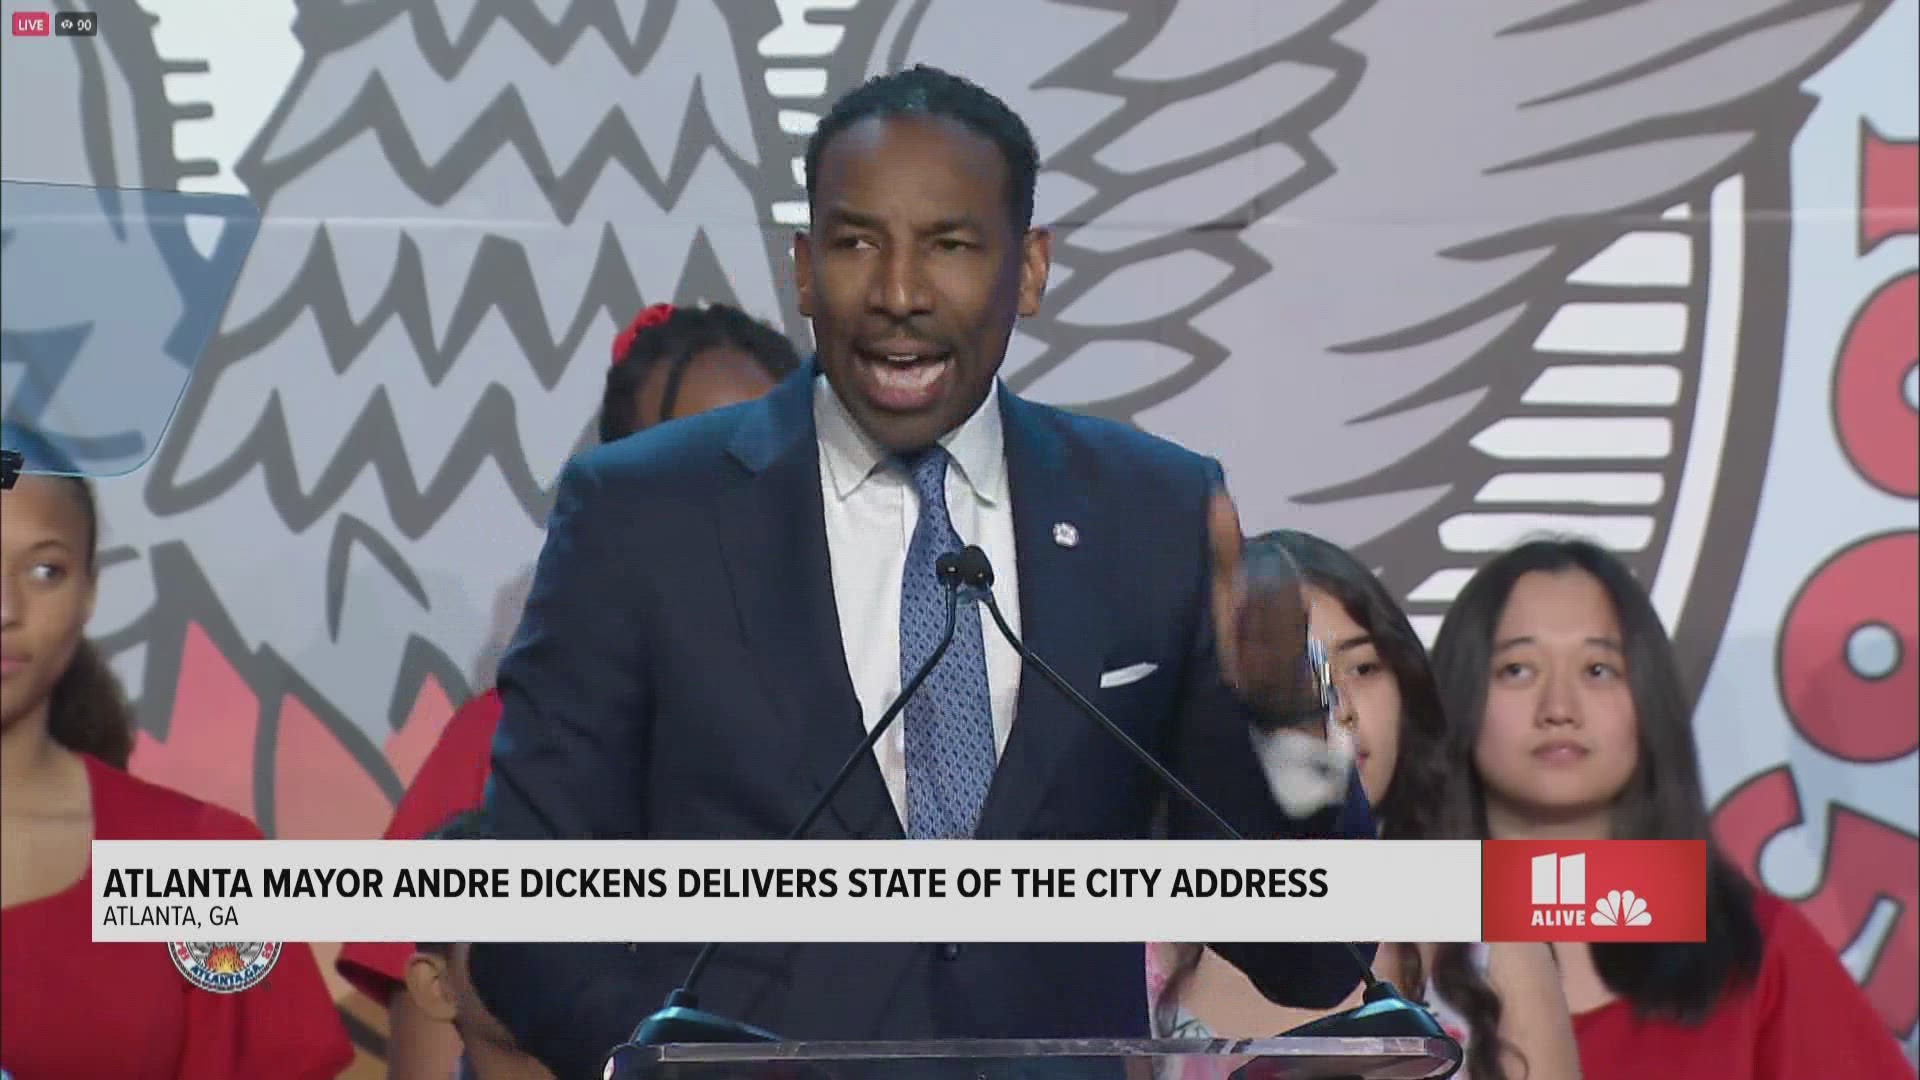 Mayor Andre Dickens, the 61st mayor of Atlanta, delivered the 2023 State of the City Address on March 28, 2023.